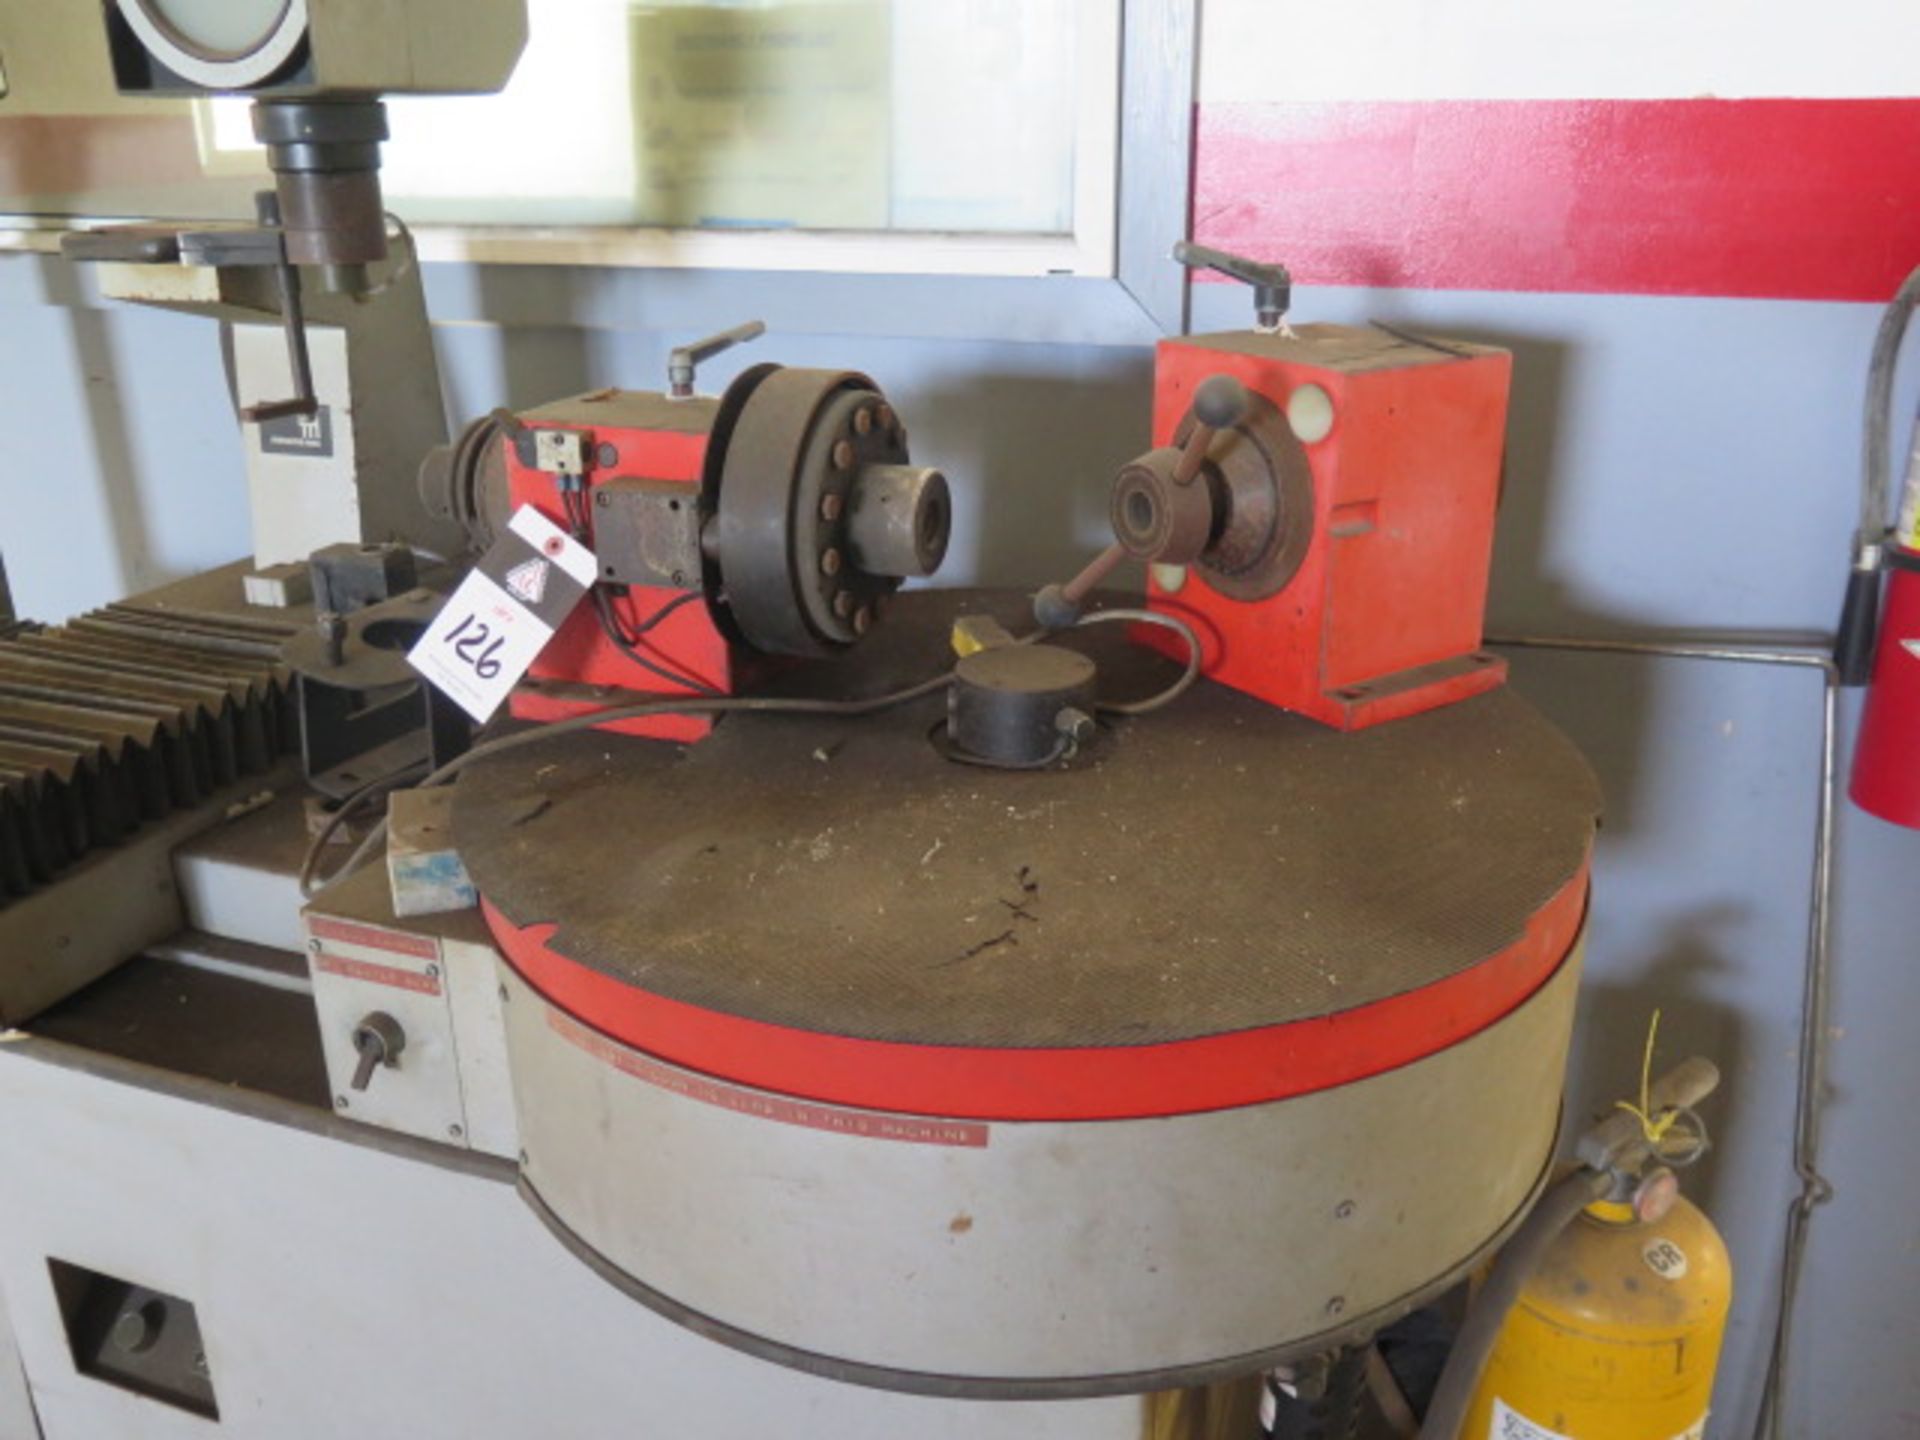 Messma-Kelch “Mini V” Tool Presetter w/ Messma Dig Controls, 40-Taper and 50-Taper, SOLD AS IS - Image 3 of 12